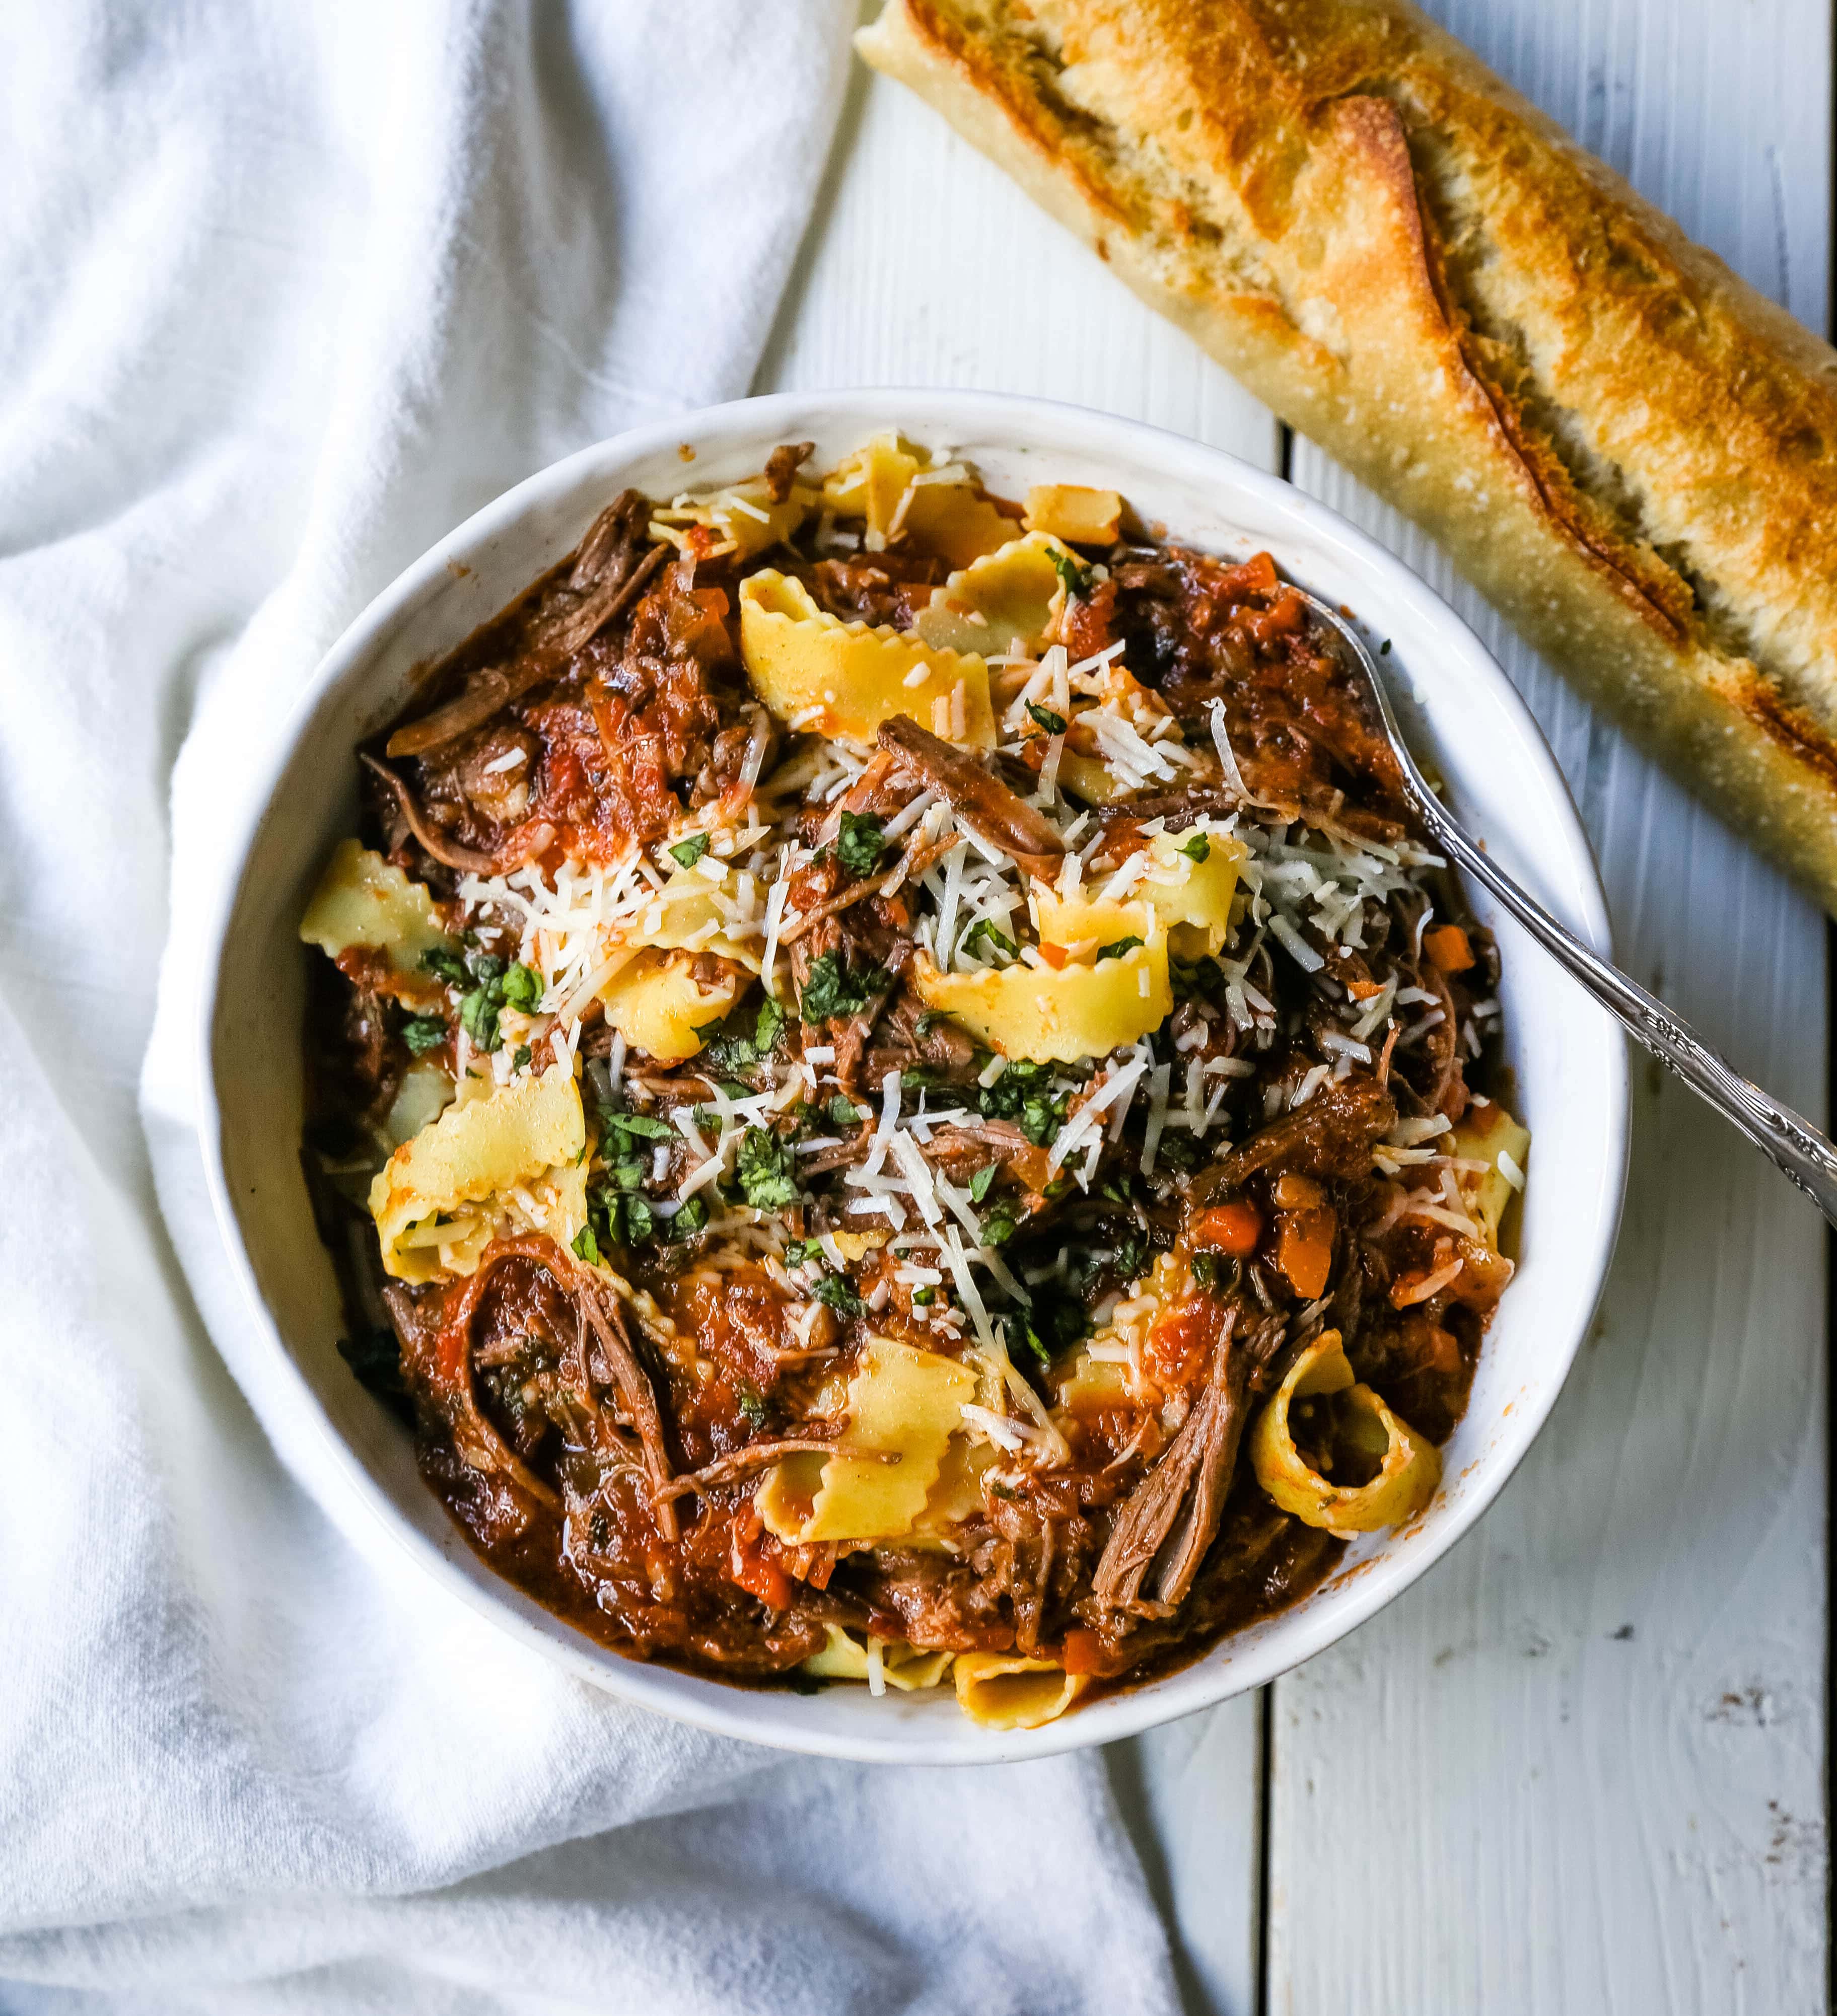 Sunday Slow Cooker Beef Ragu. Authentic Italian Beef Ragu. The ultimate comfort food! A big bowl of slow cooked, braised beef in a rich, robust tomato sauce tossed with pasta. I guarantee that you will go back for seconds! www.modernhoney.com #slowcooker #beefragu #italianfood #italian